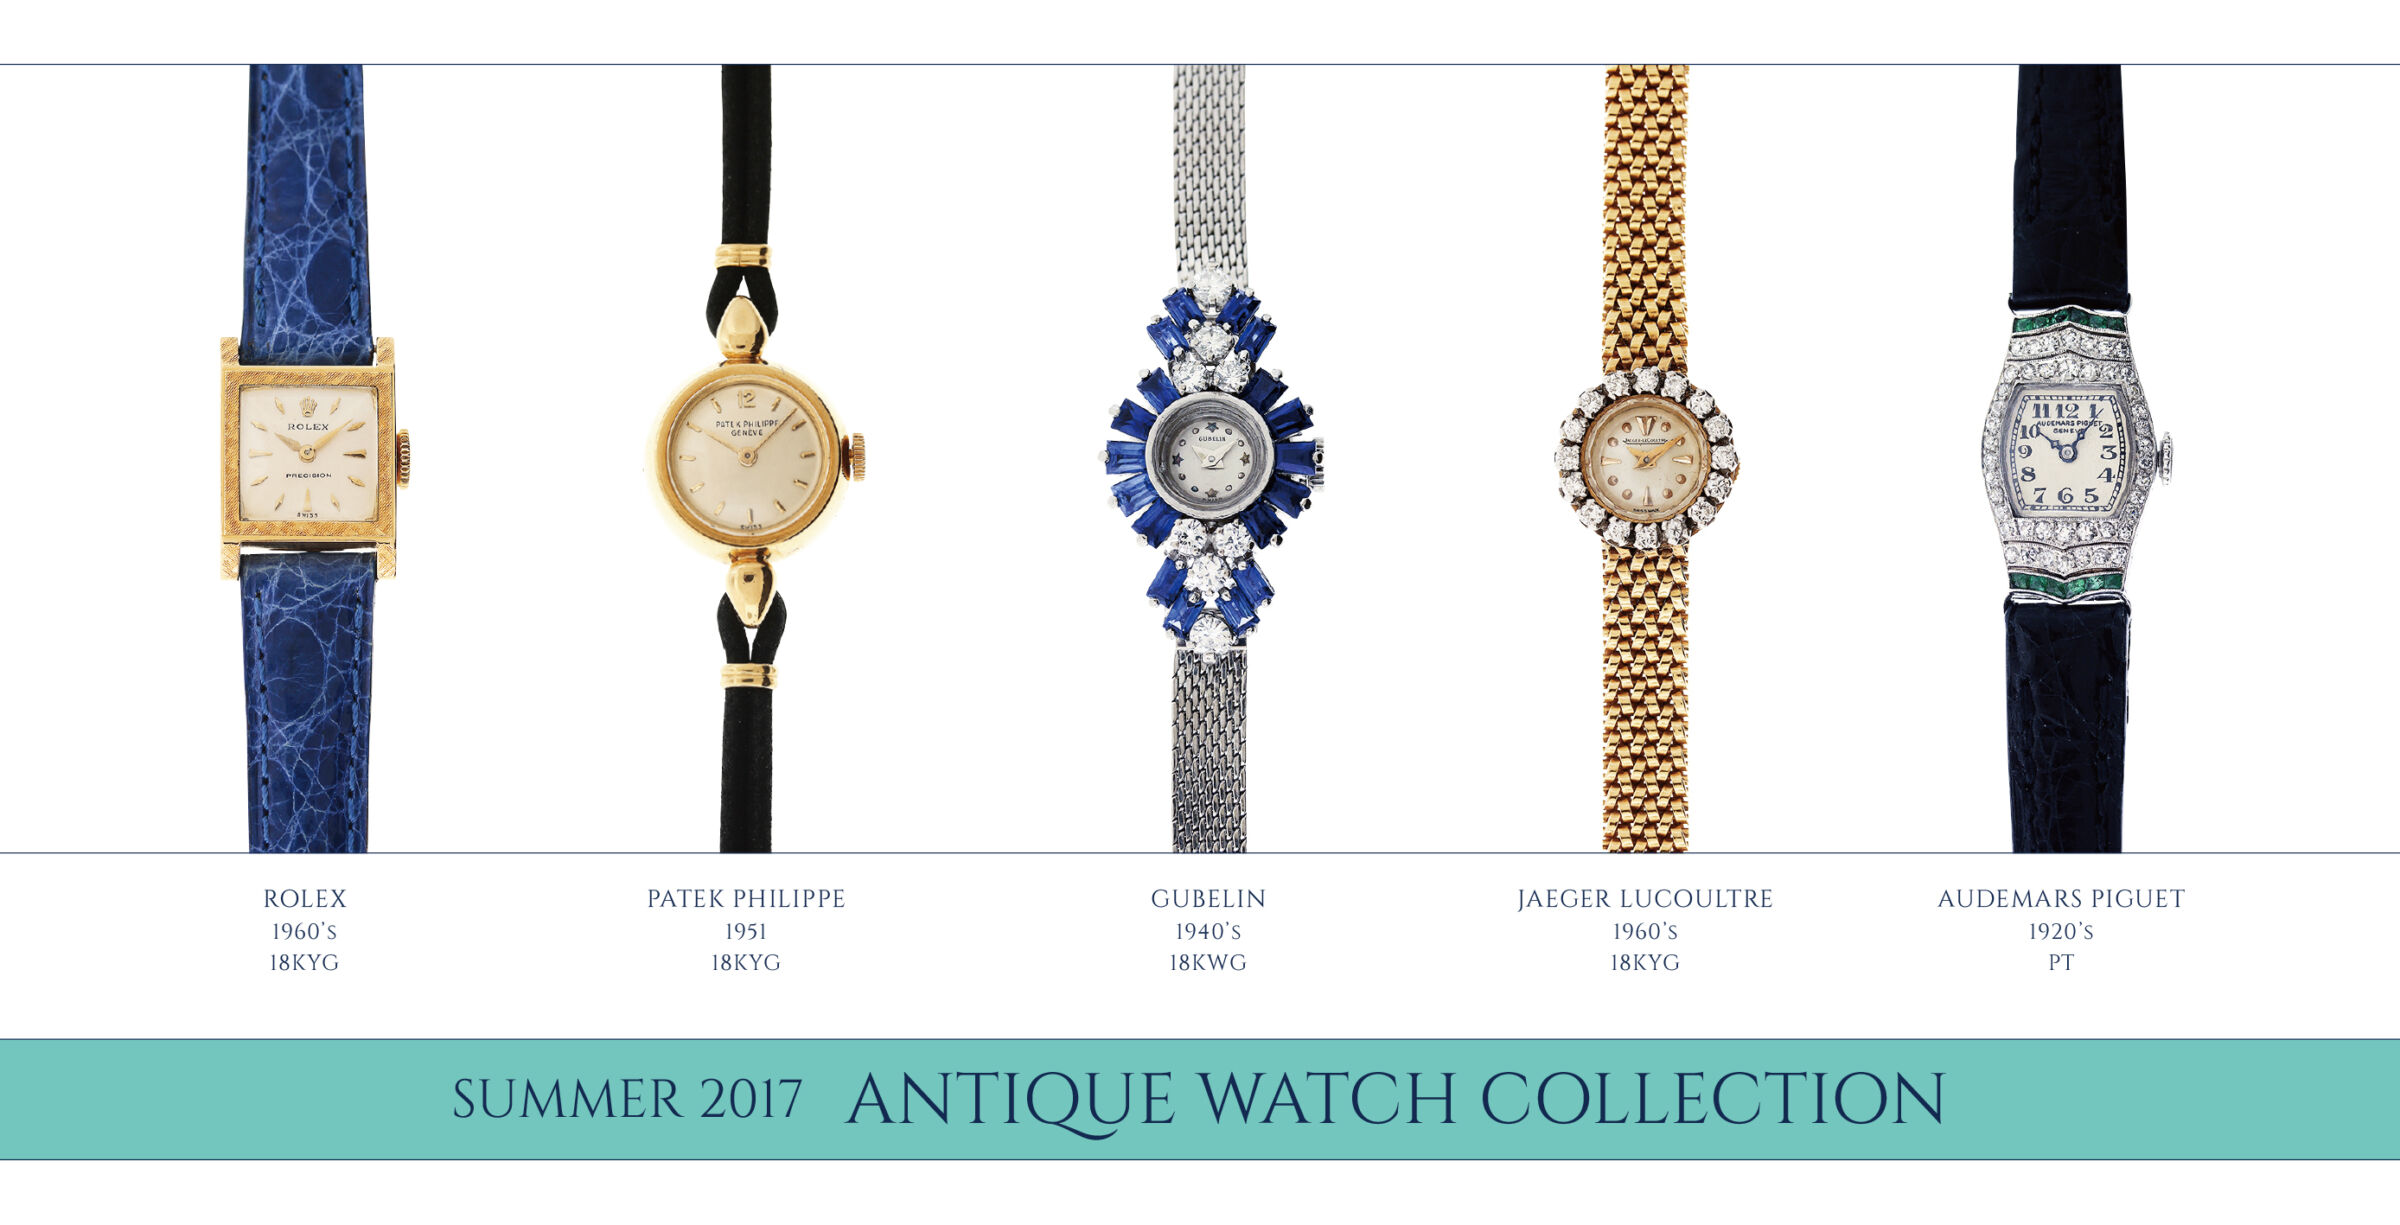 SUMMER 2017 ANTIQUE WATCH COLLECTION